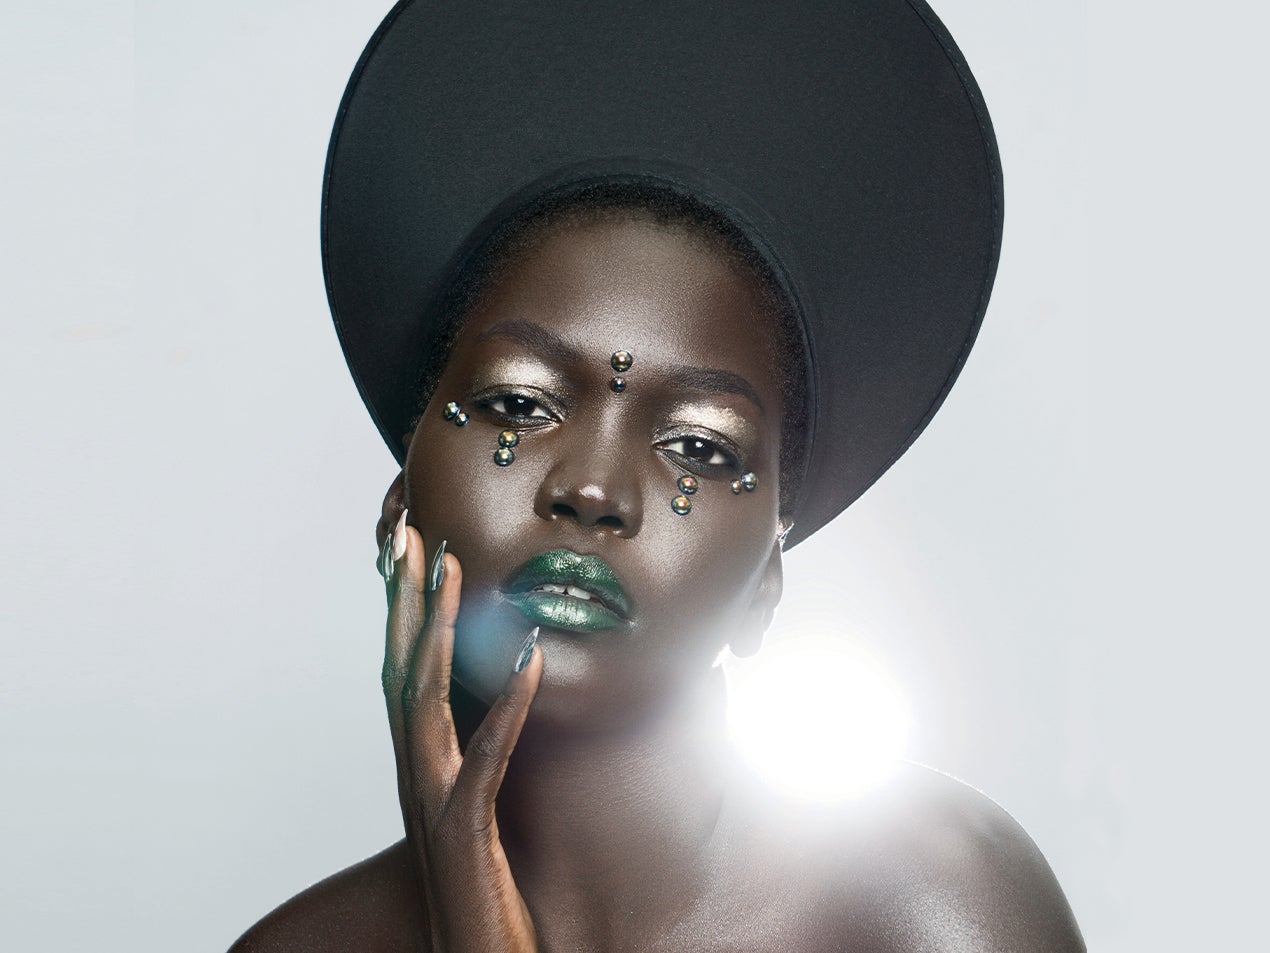 6 Black Makeup Artists Talk About Adjusting To The 'New Normal' Amid Coronavirus Pandemic